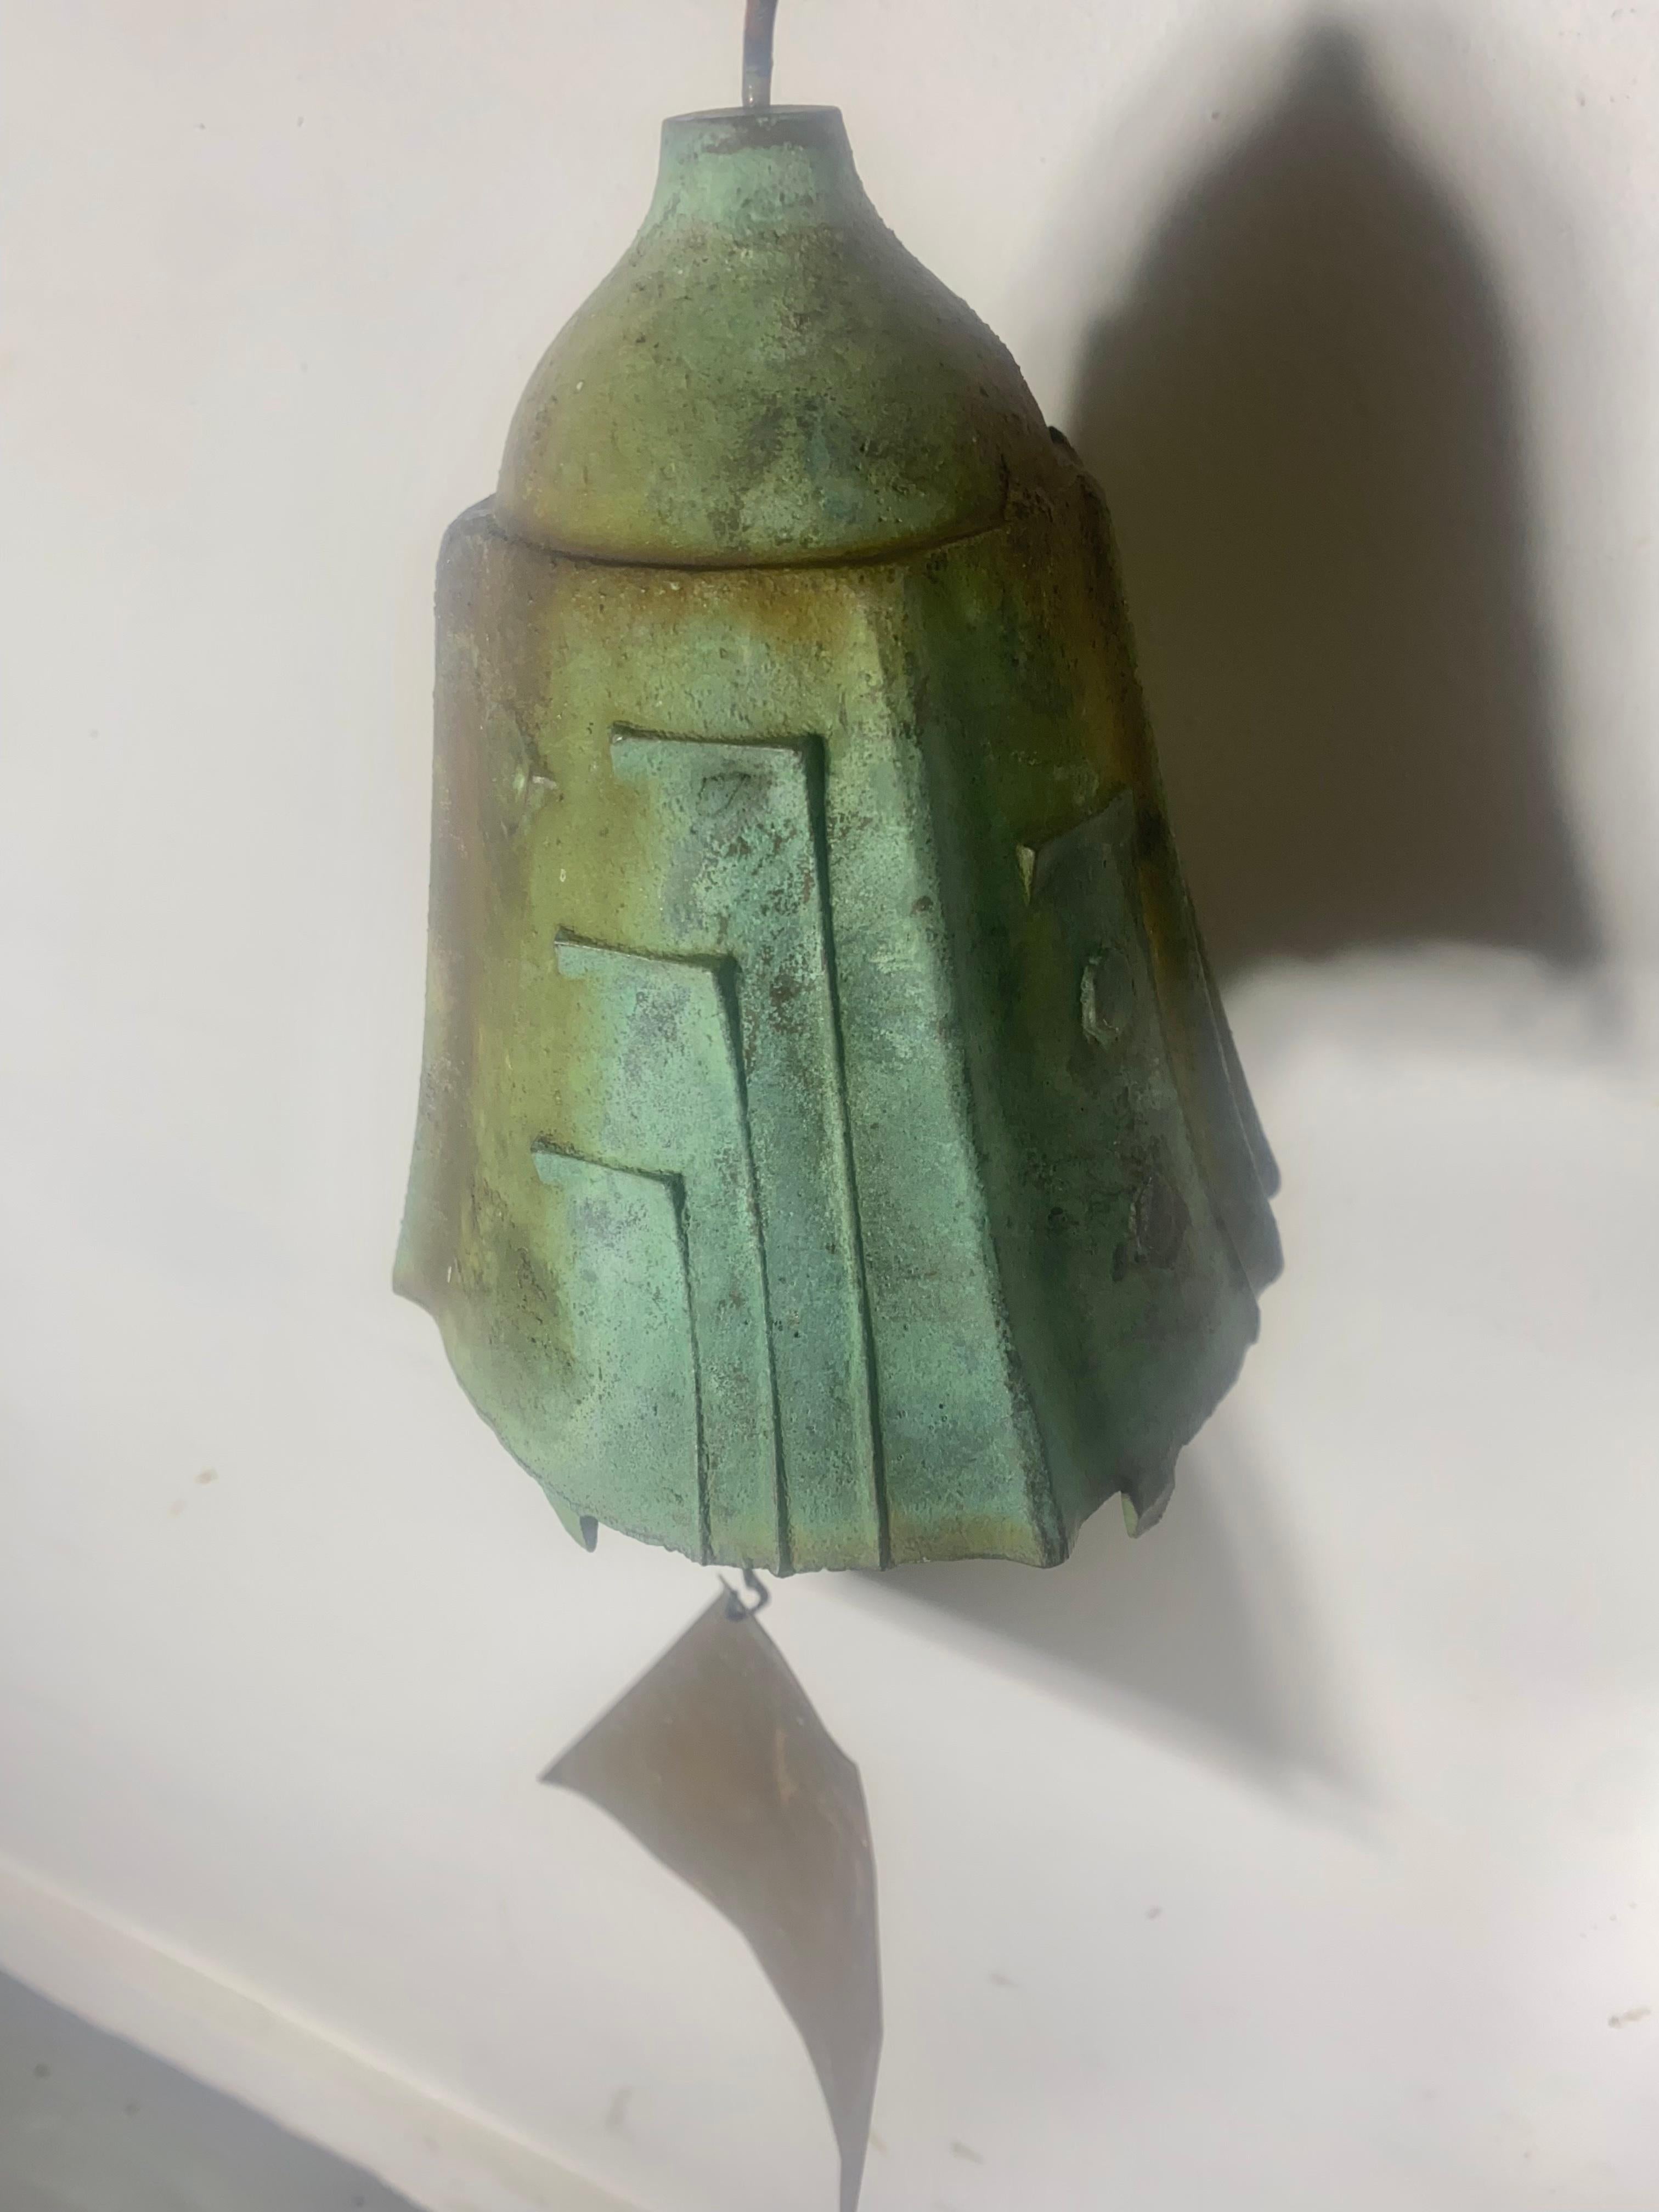 Wind chime/bell designed by architect, Paolo Soleri for Arconsanti (the city he designed and built in Arizona in 1970). Bronze cast elements with verdigris patina and multi-color pigmented fin. Early production with attractive colors employed.